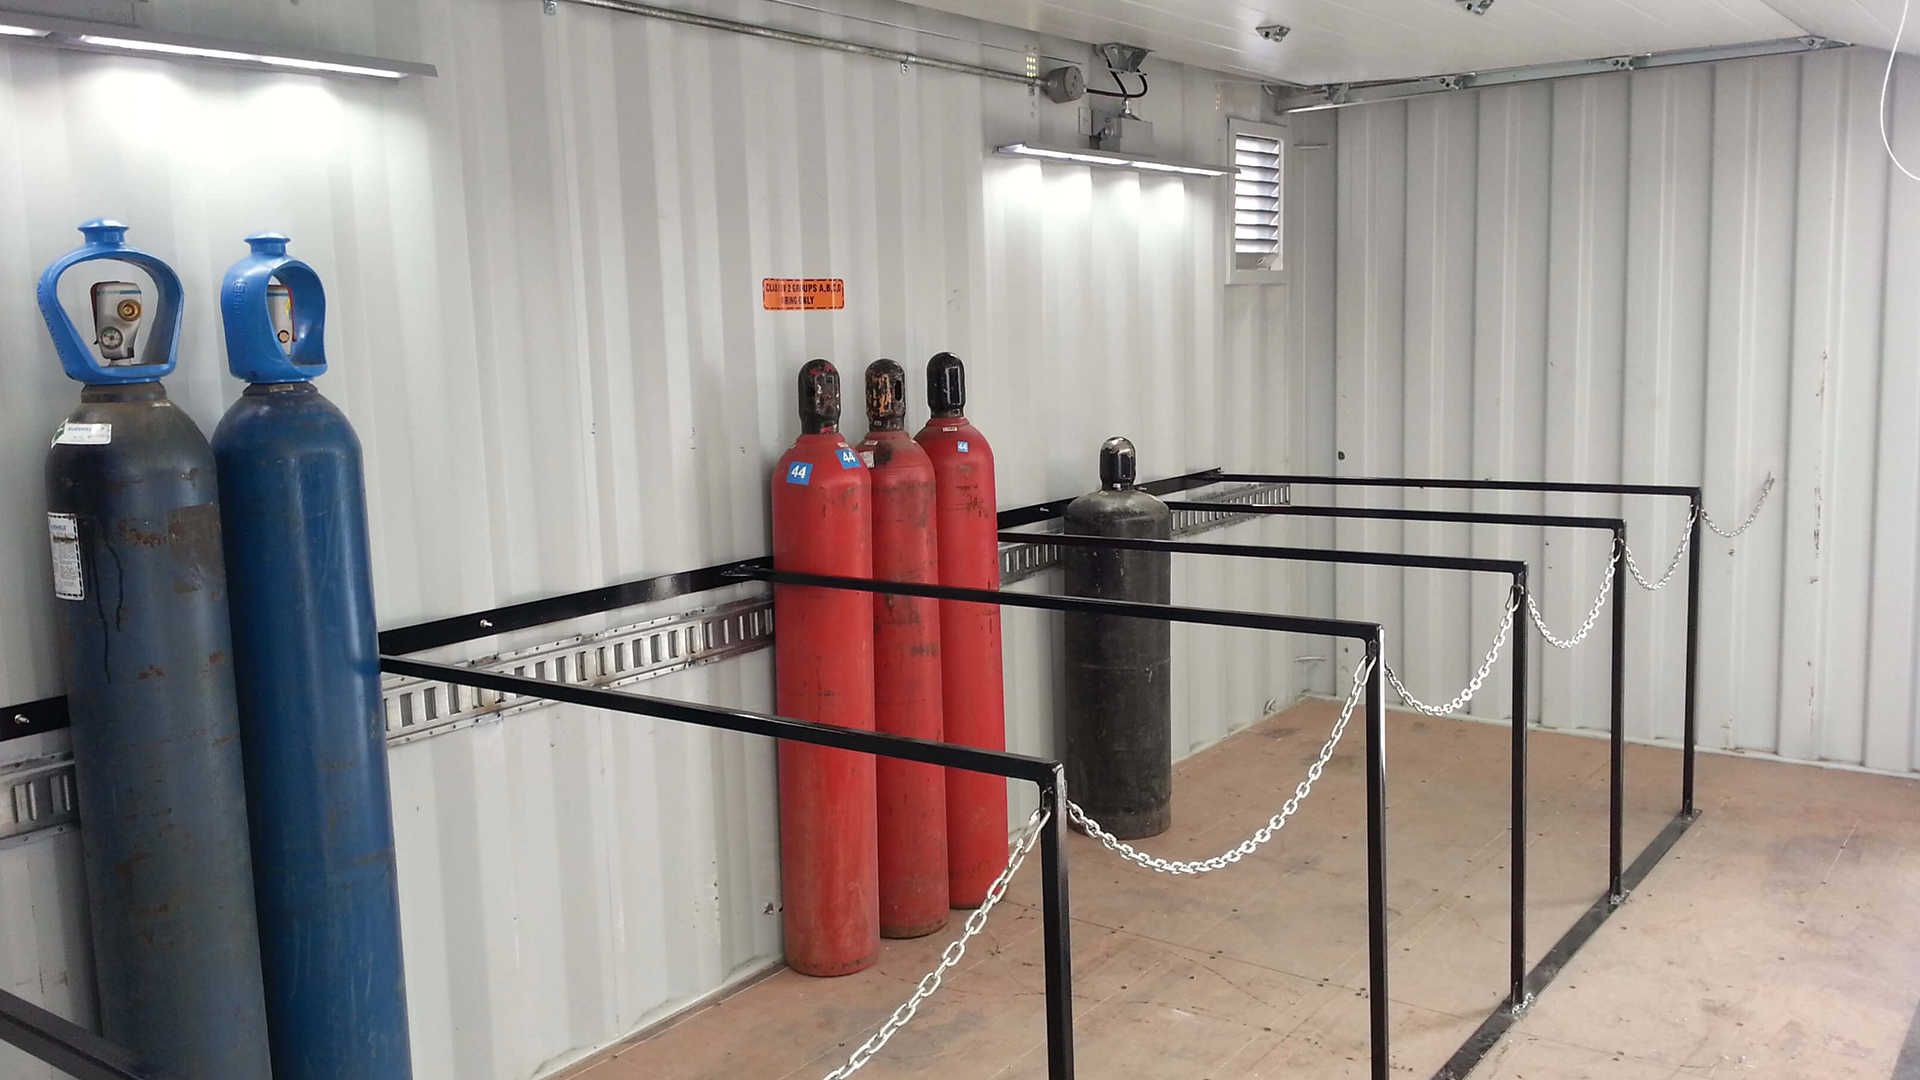 Pressurized cylinders inside of container